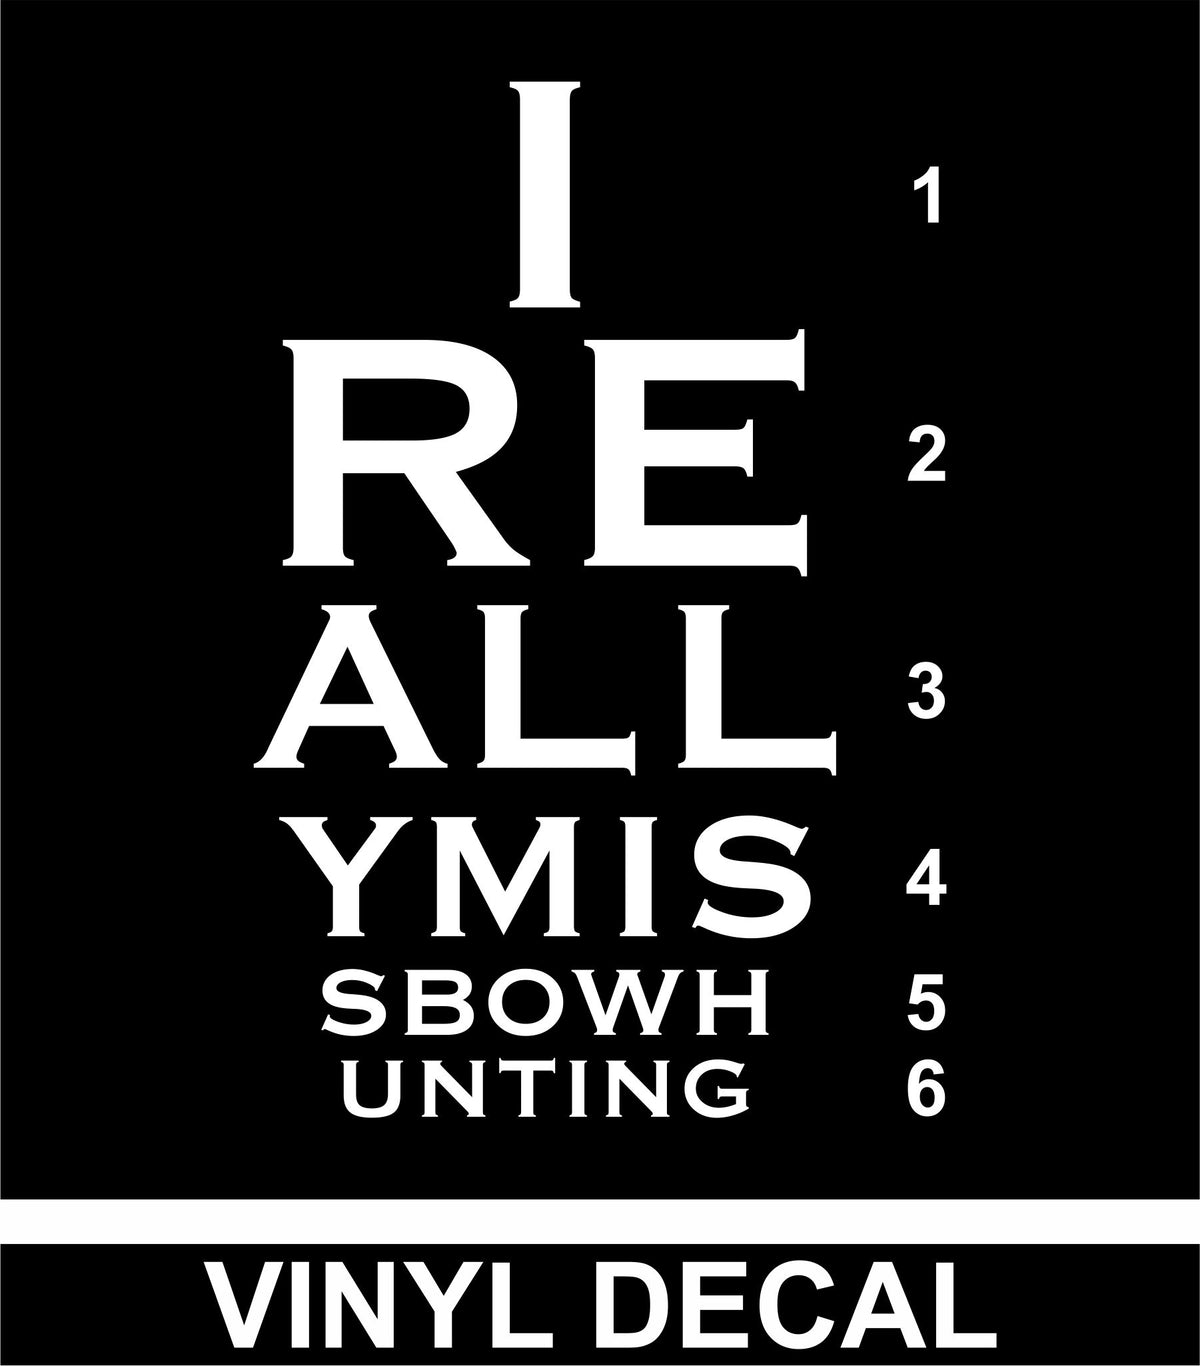 I Really Miss Bow Hunting - Vinyl Decal - Free Shipping